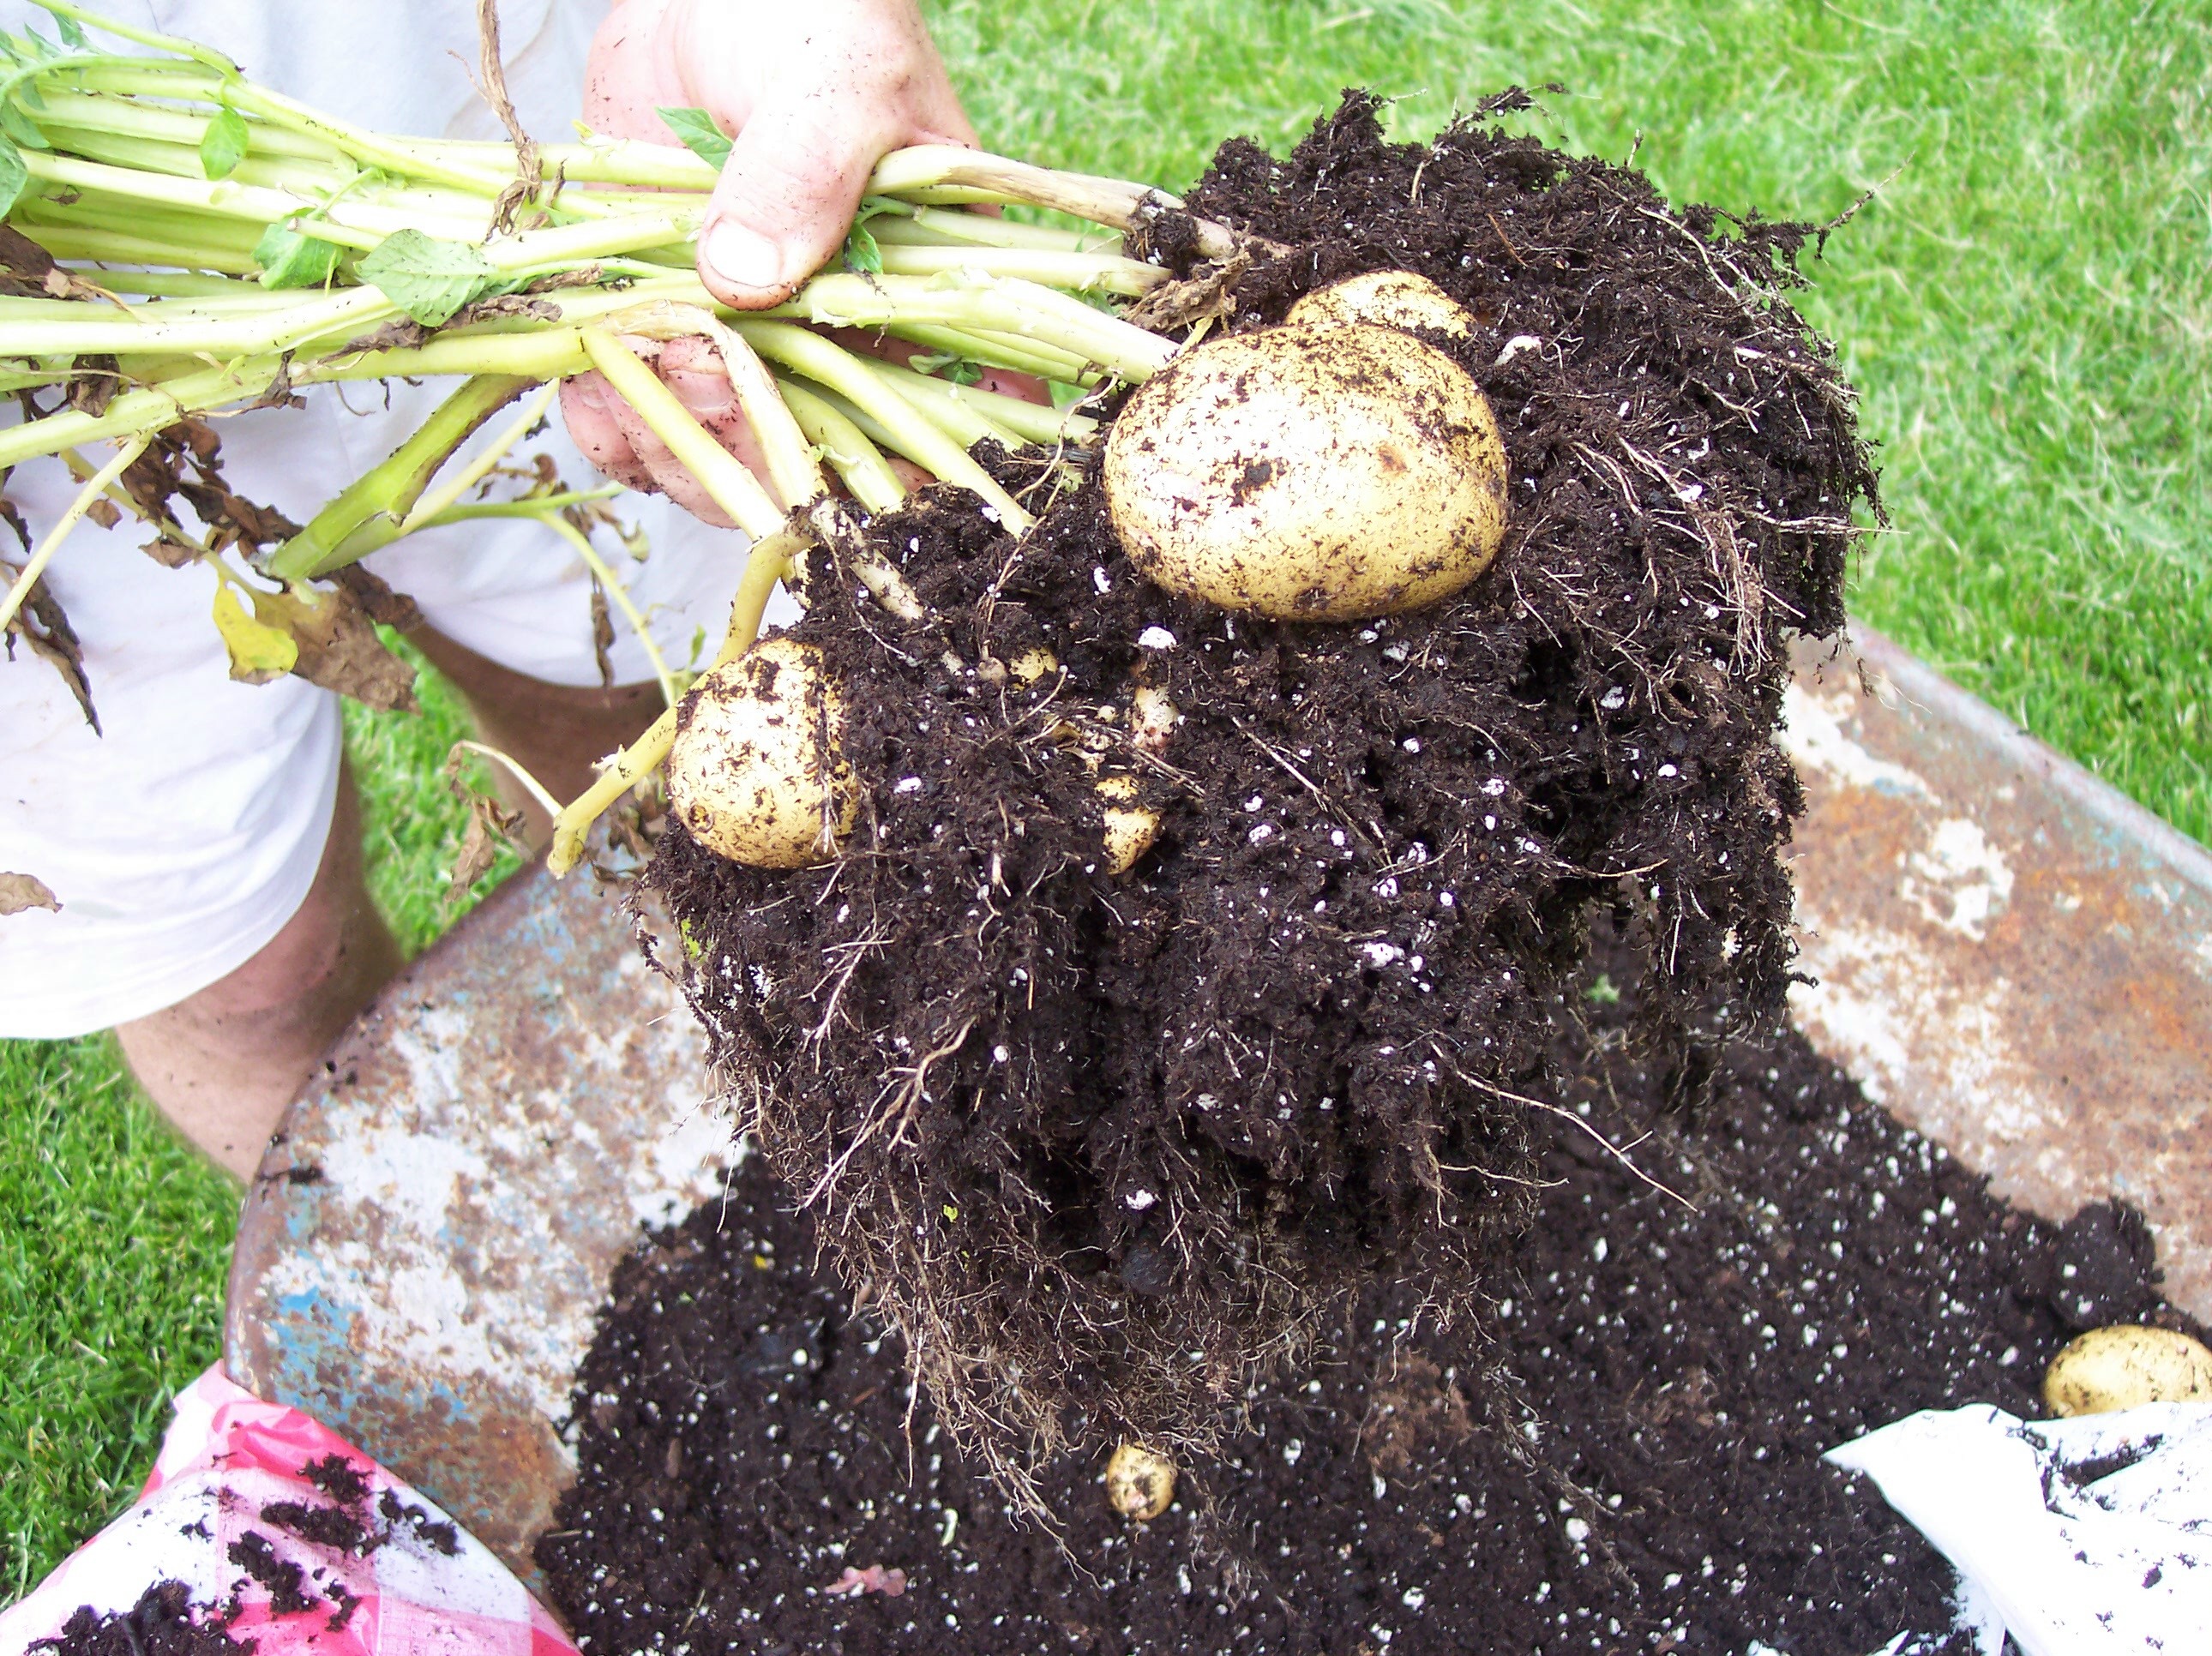 Potato tubers formed at base of plant